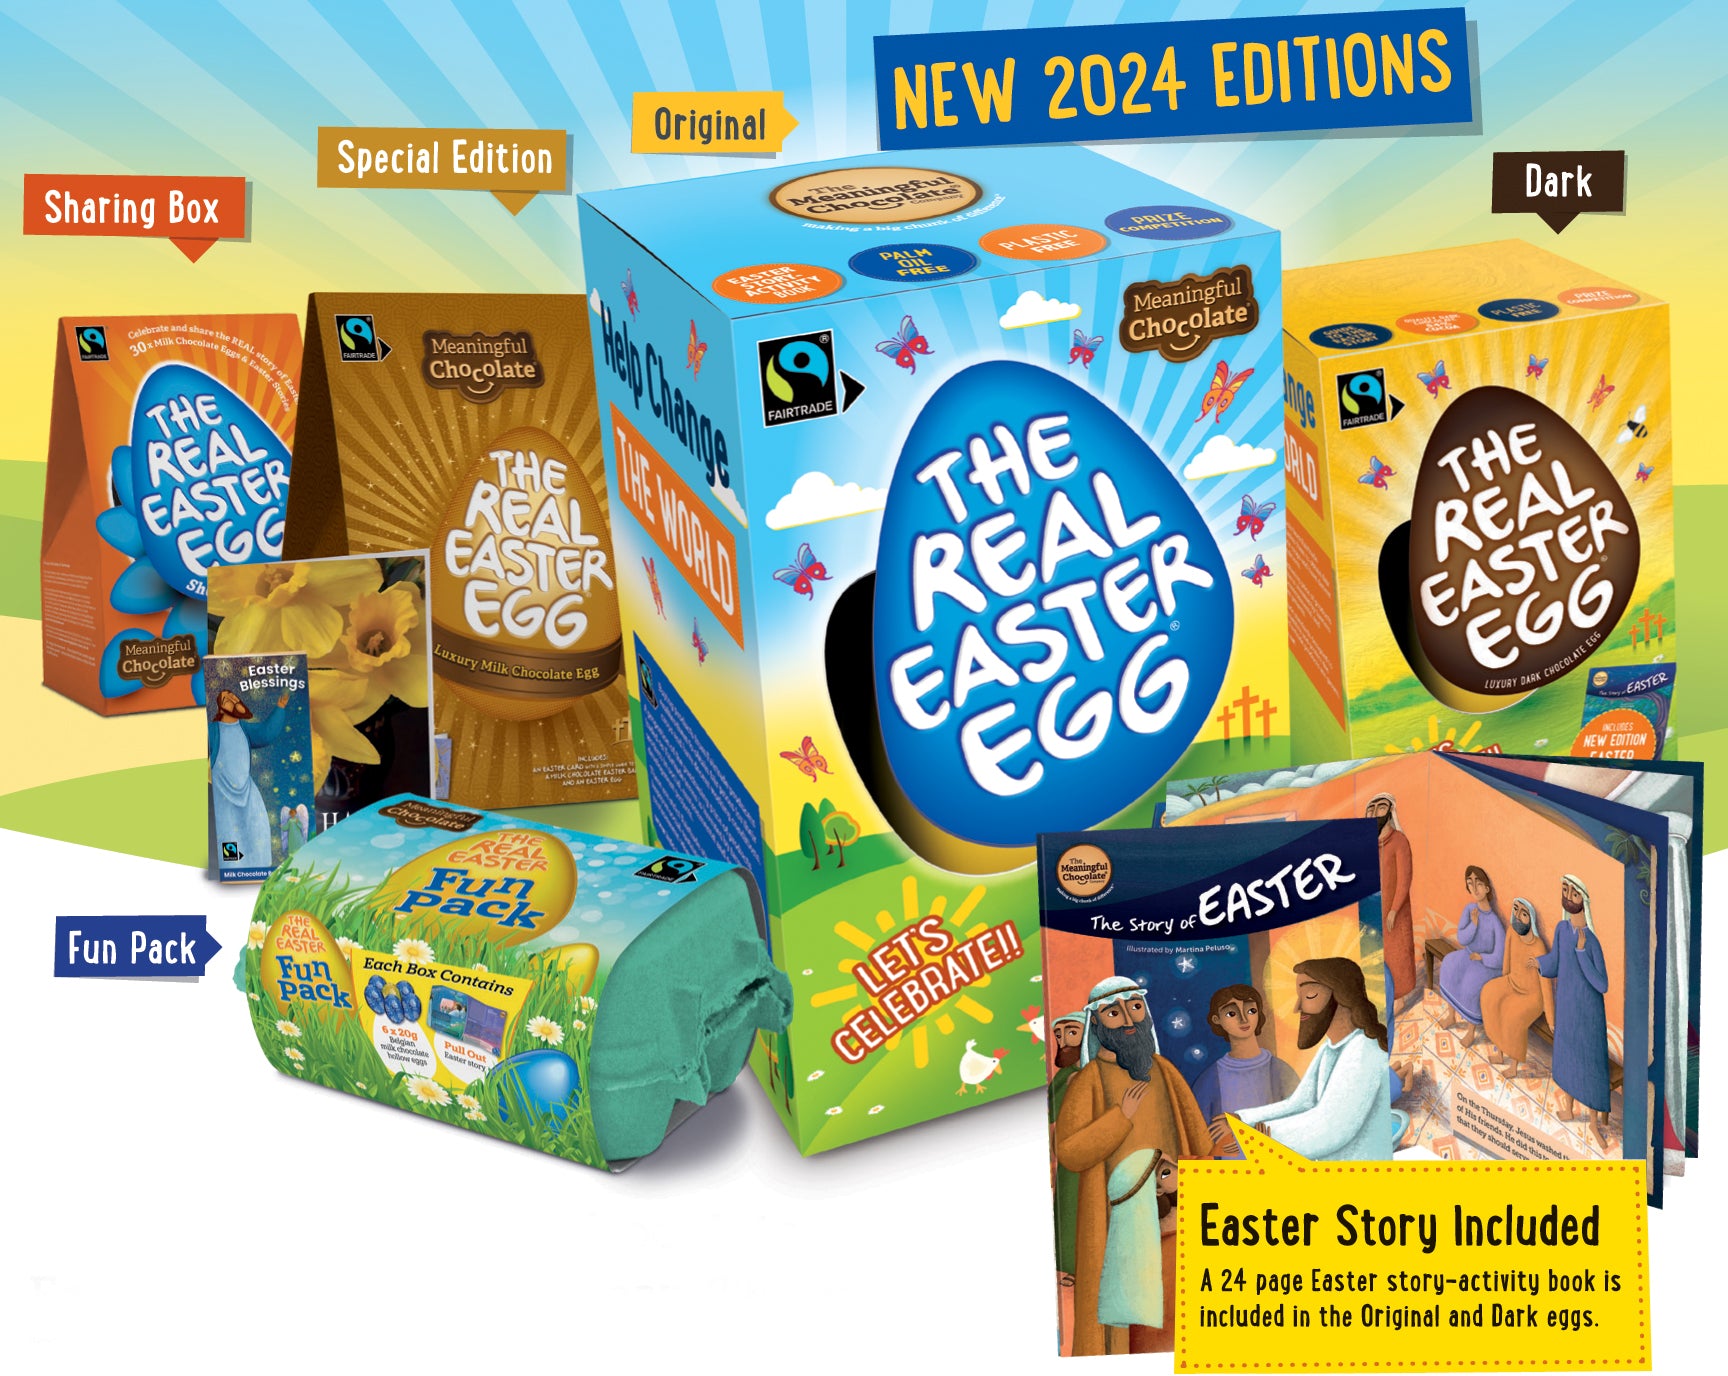 2024 Real Easter Eggs launched (Easter is very early this year!!!)